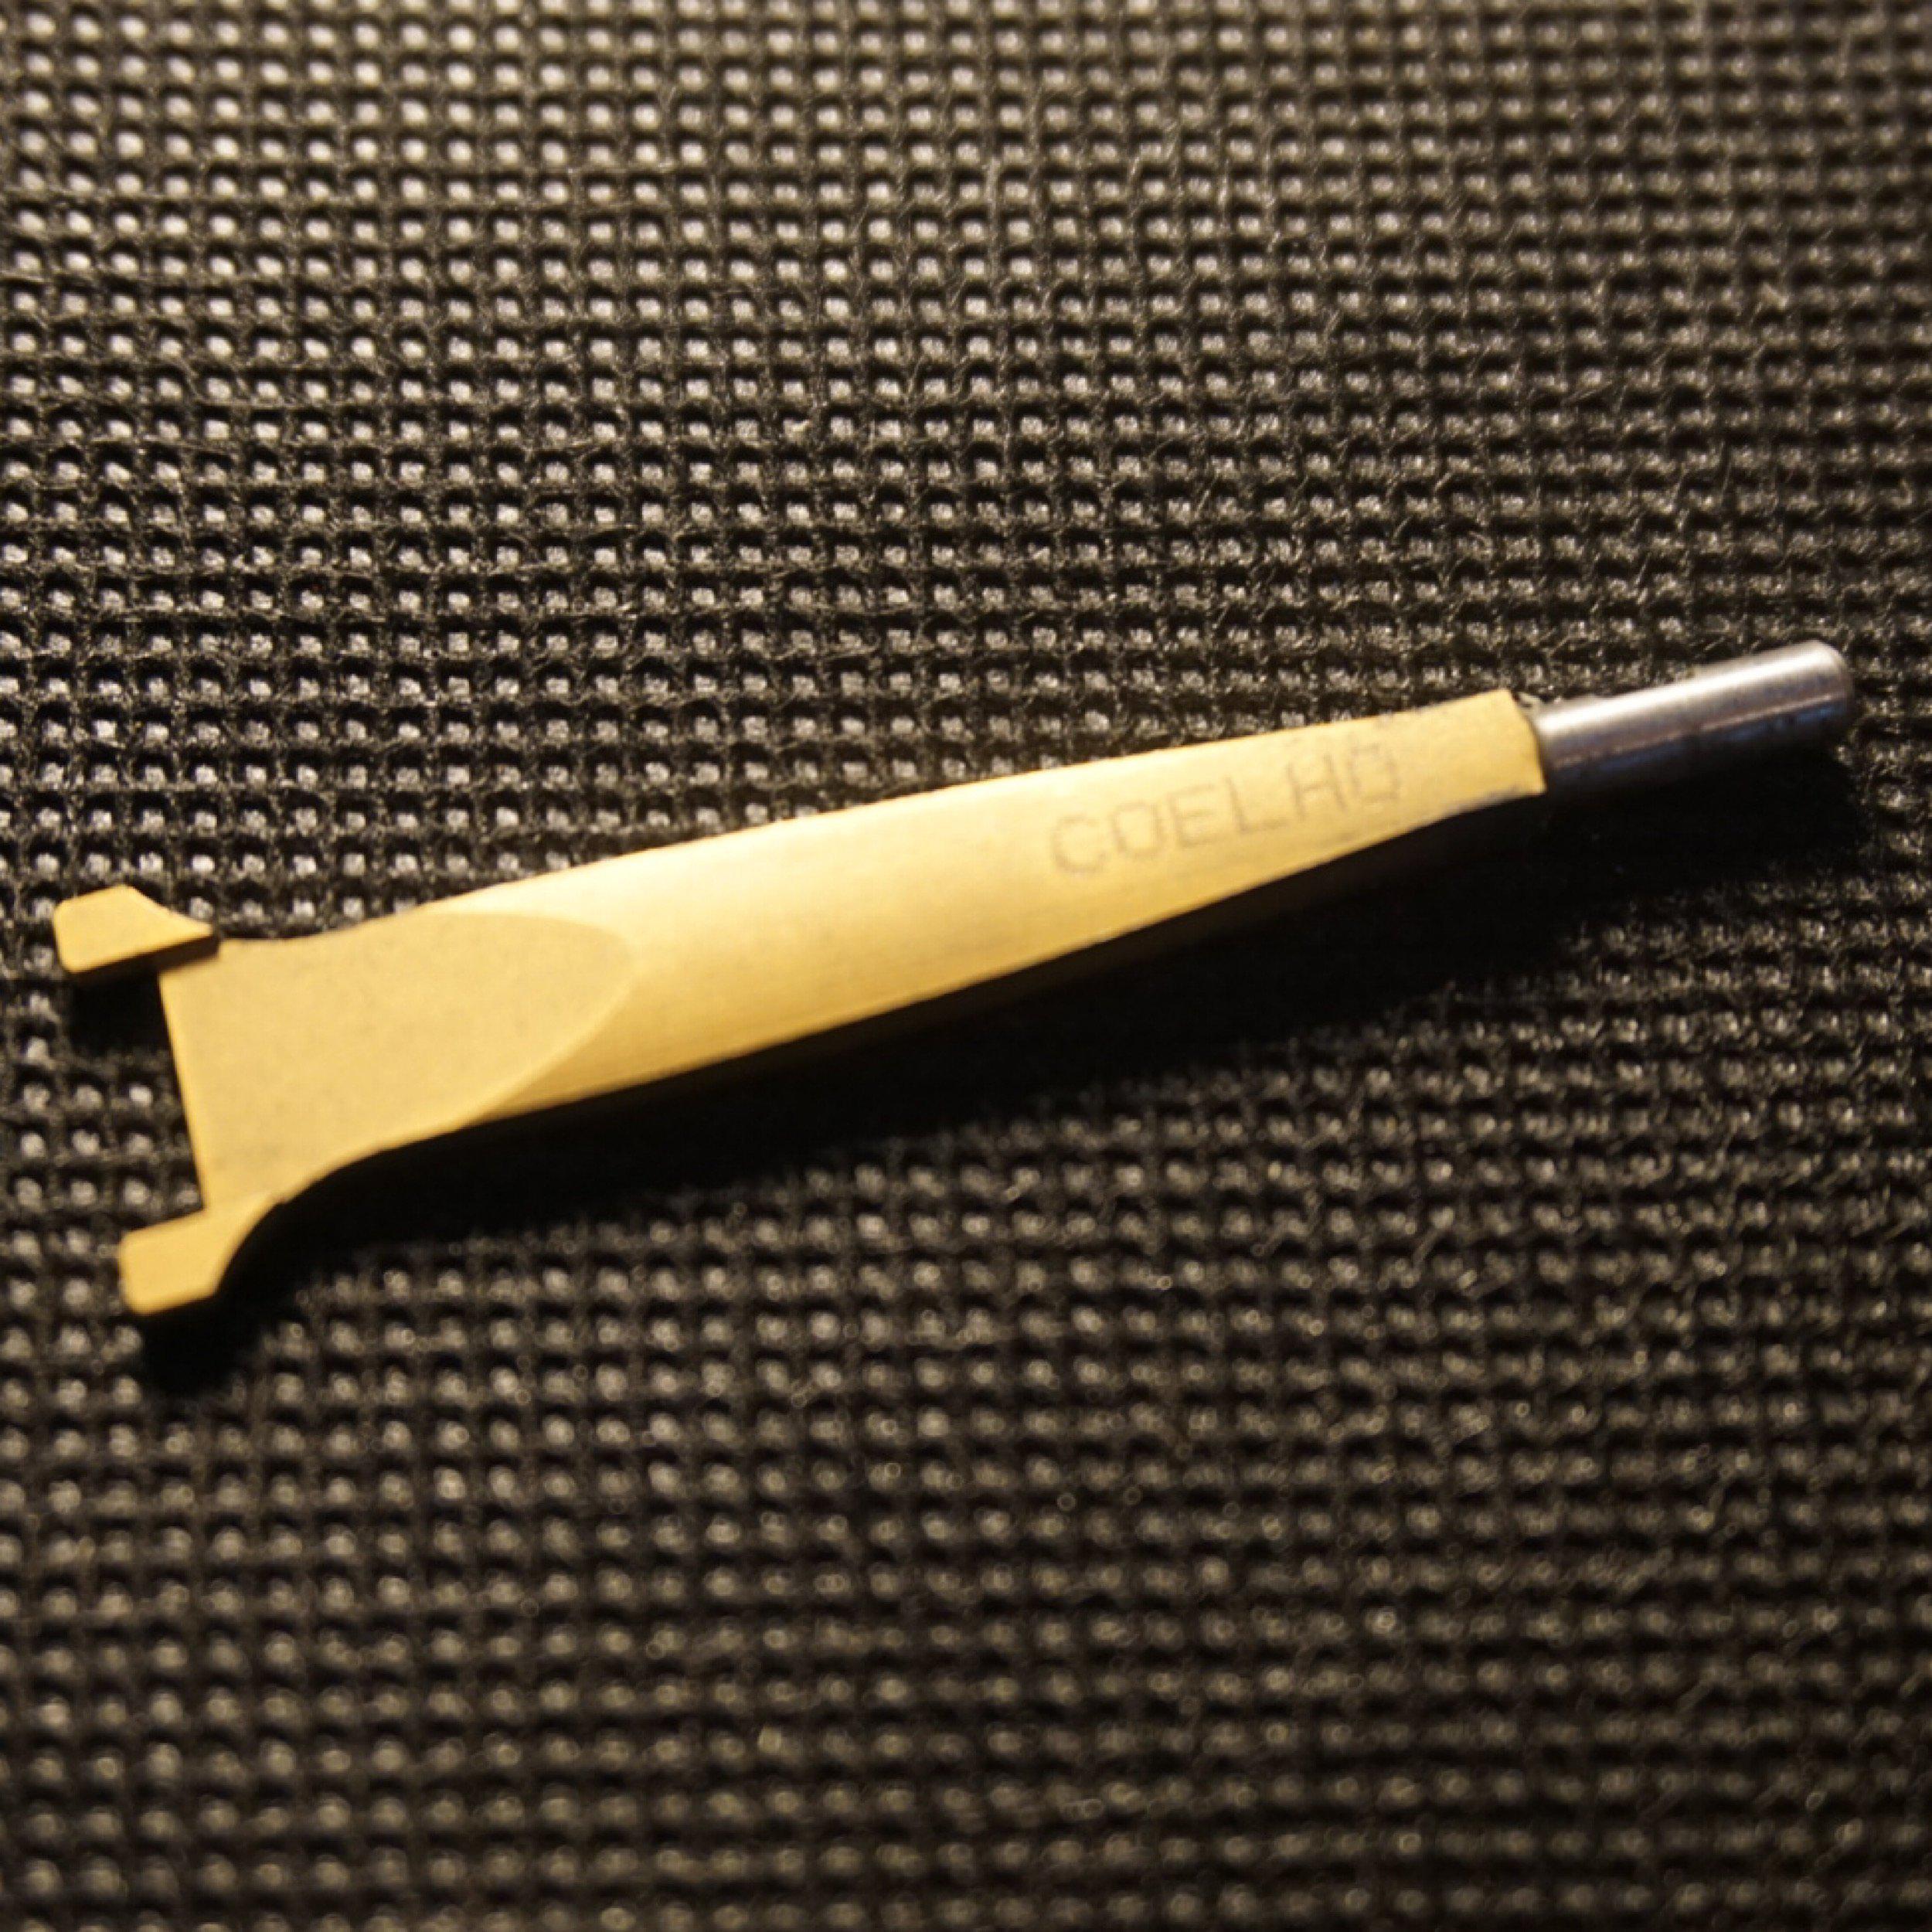 Coelho oboe shaper tip to make Gouged shaped and folded oboe cane, ready to be made into the best oboe reeds